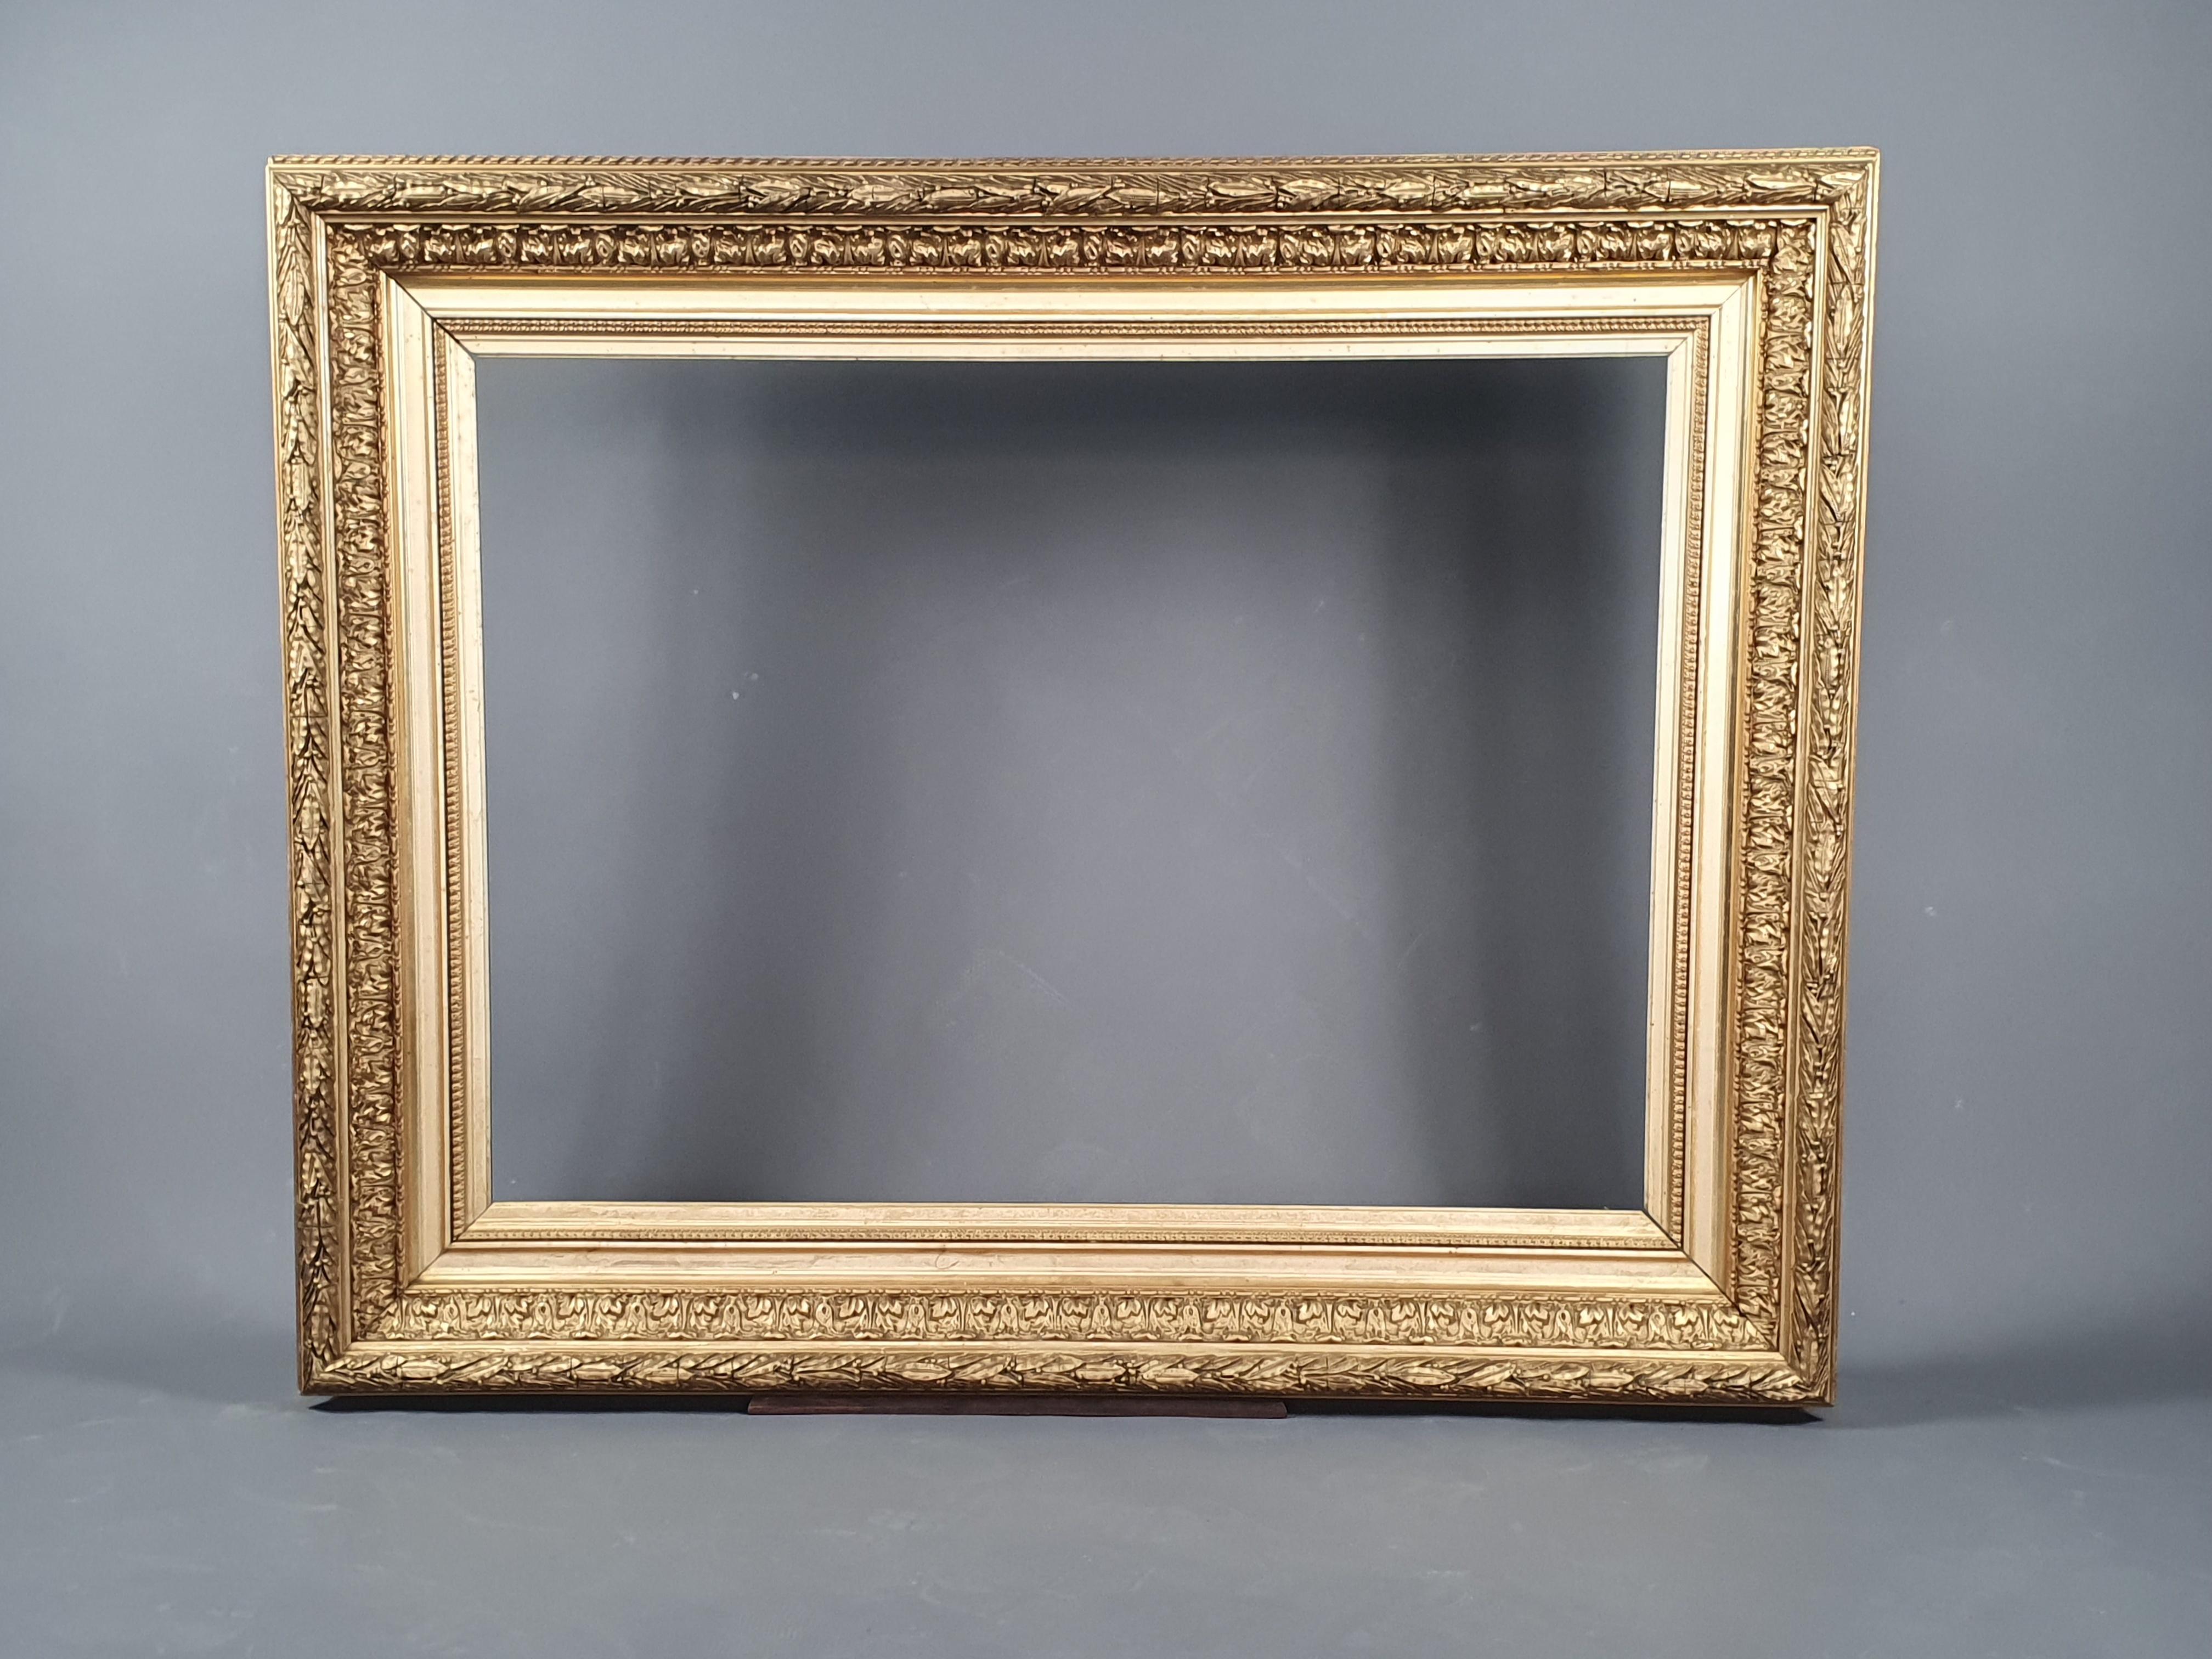 Large Napoleon III frame in wood and gilded stucco with rich decoration of successive friezes of gadroons, foliage, pearls, .. alternated by gilded leaf strips and polished with agate stone.

Work from the second half of the 19th century.

Very